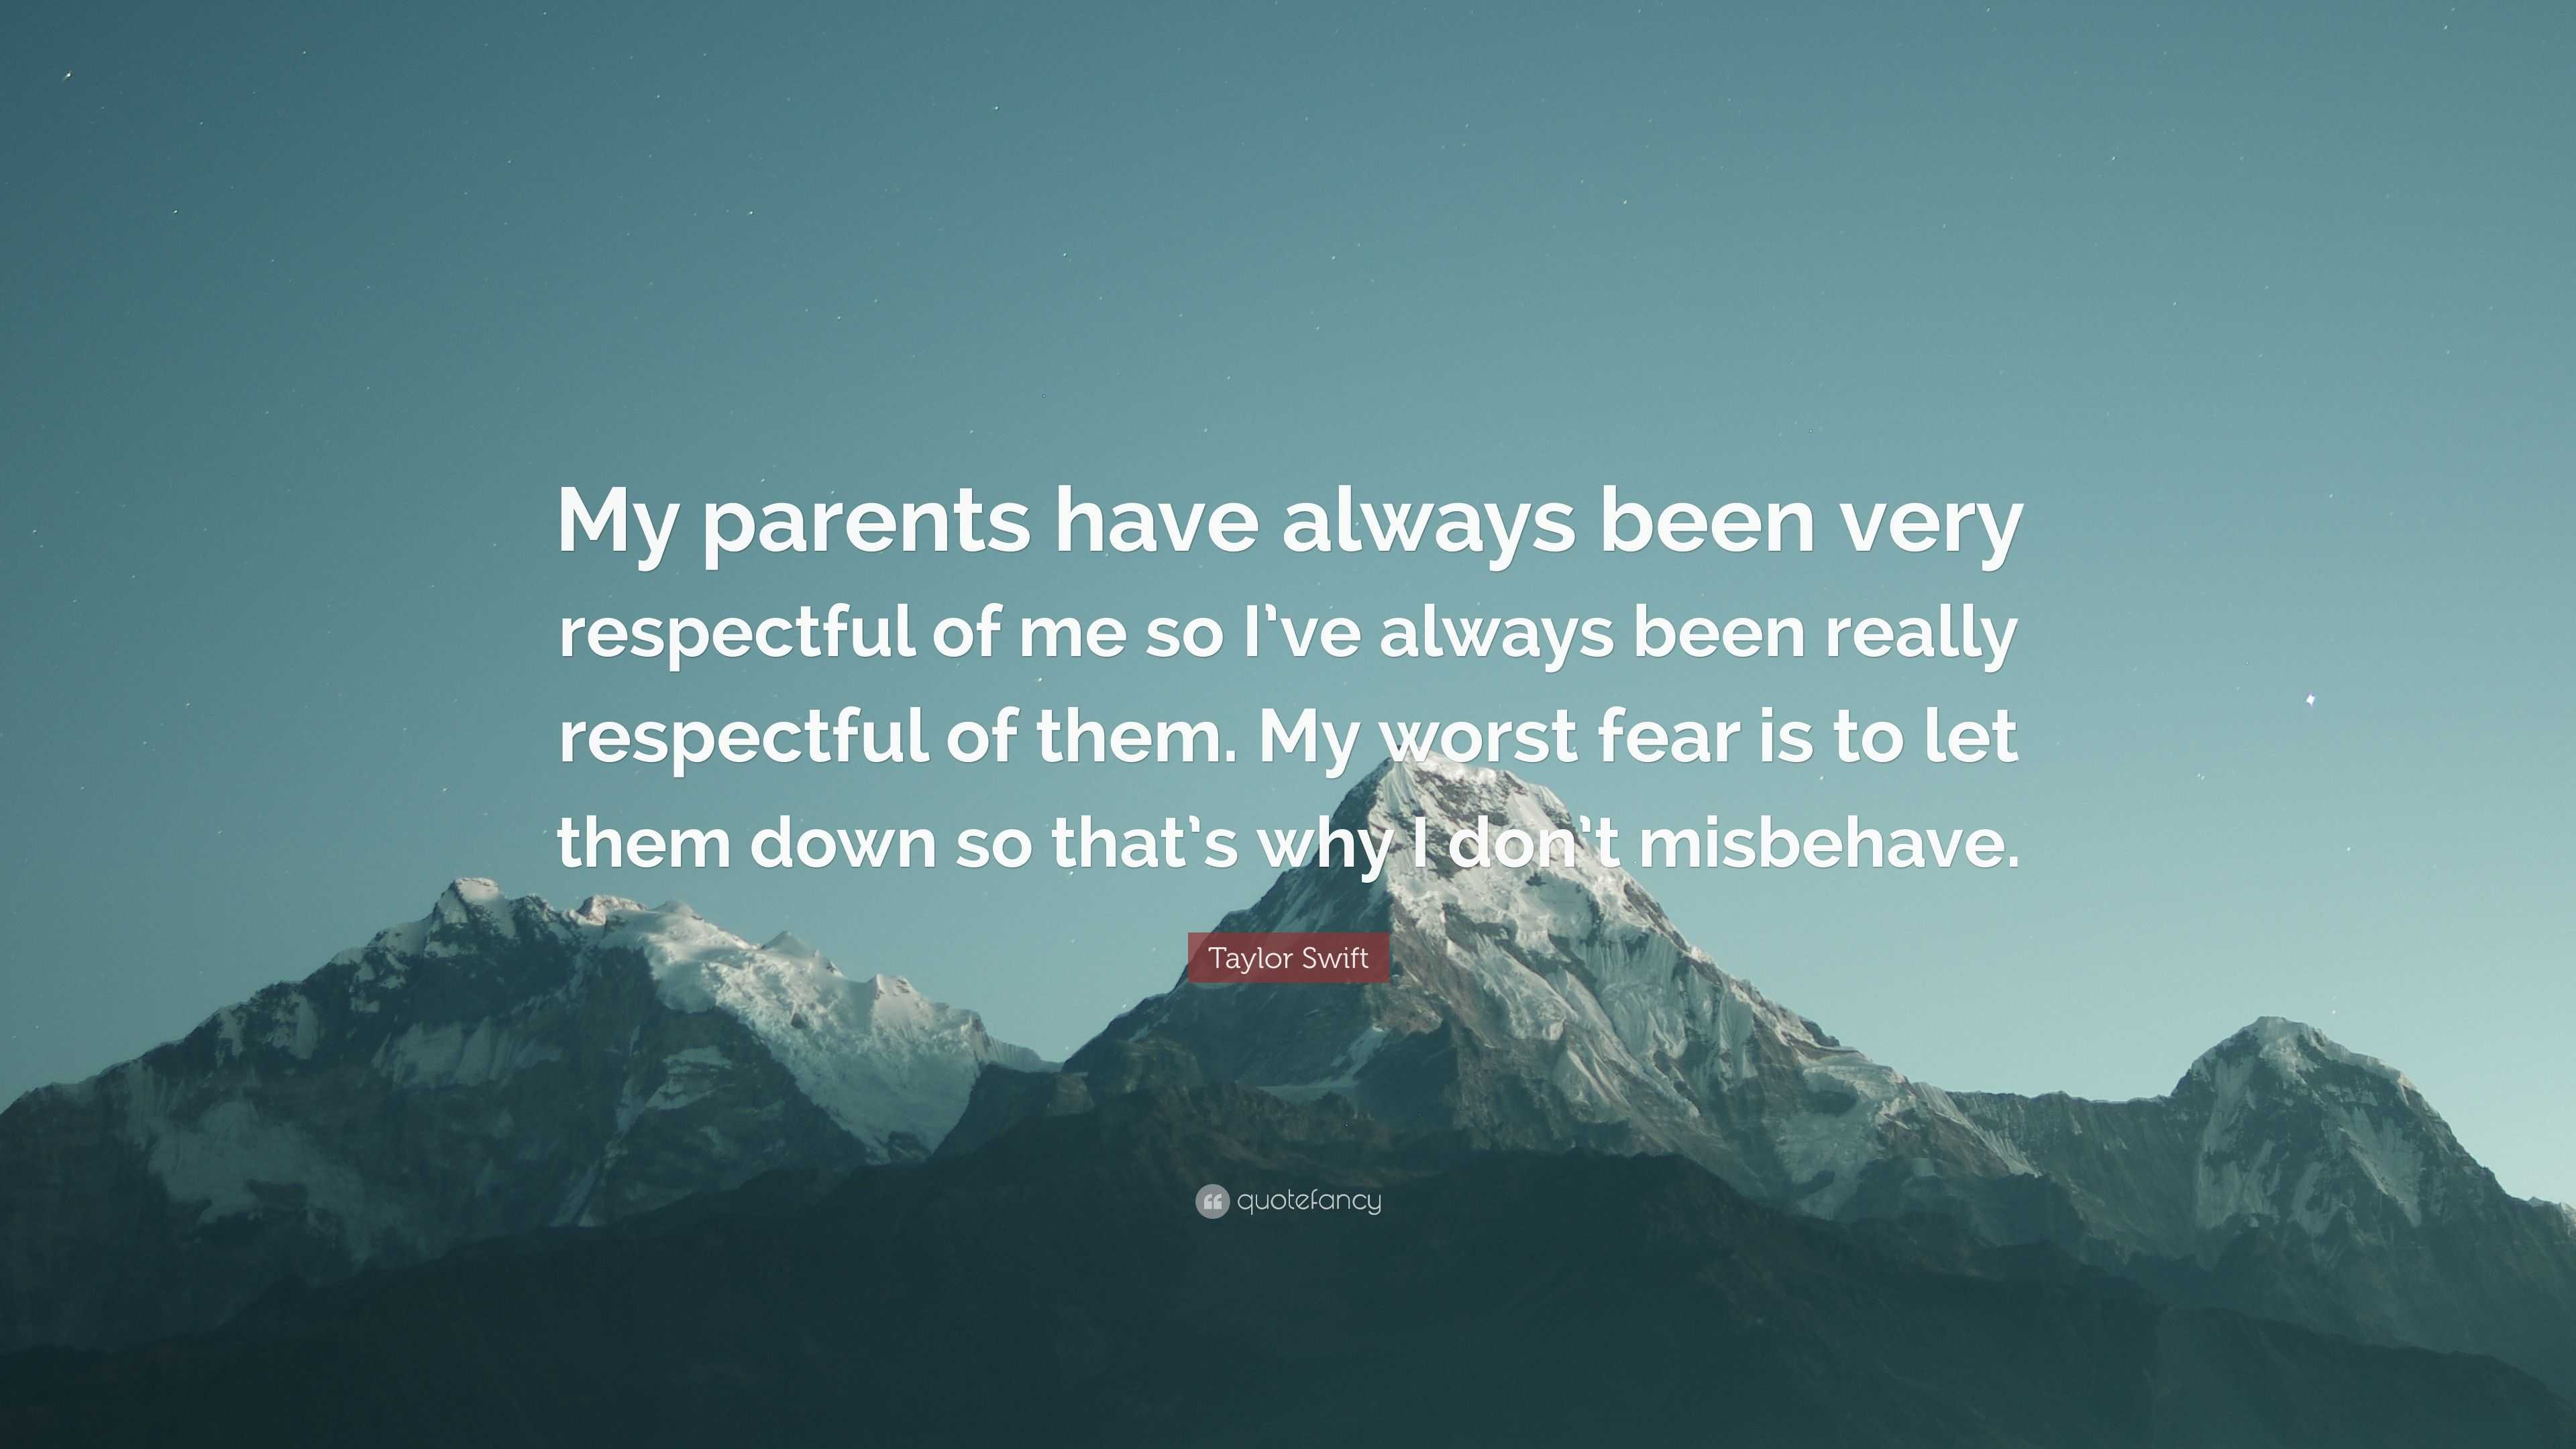 Taylor Swift Quote: “My parents have always been very respectful of me ...